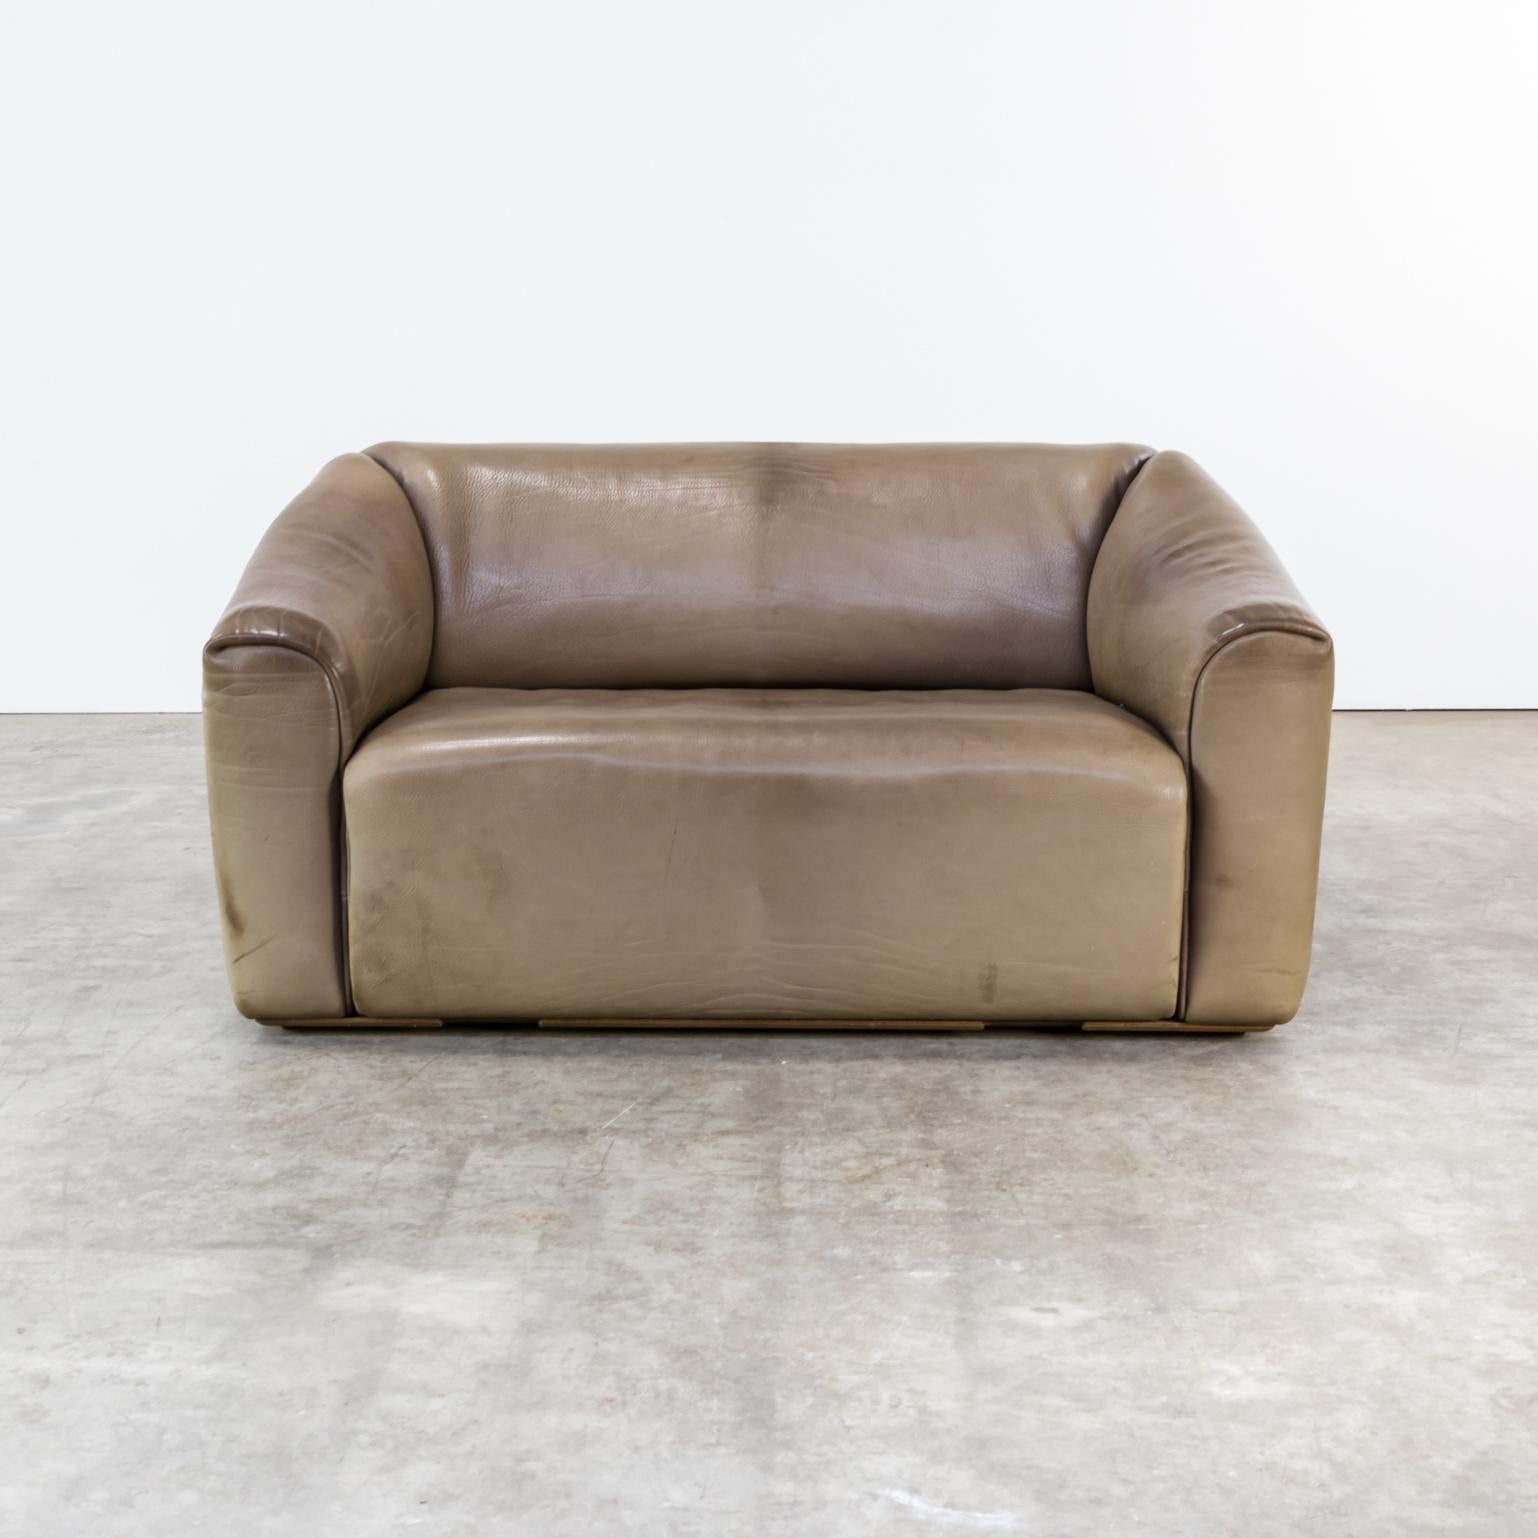 Swiss De Sede “DS47” Leather Two-Seat Sofa For Sale